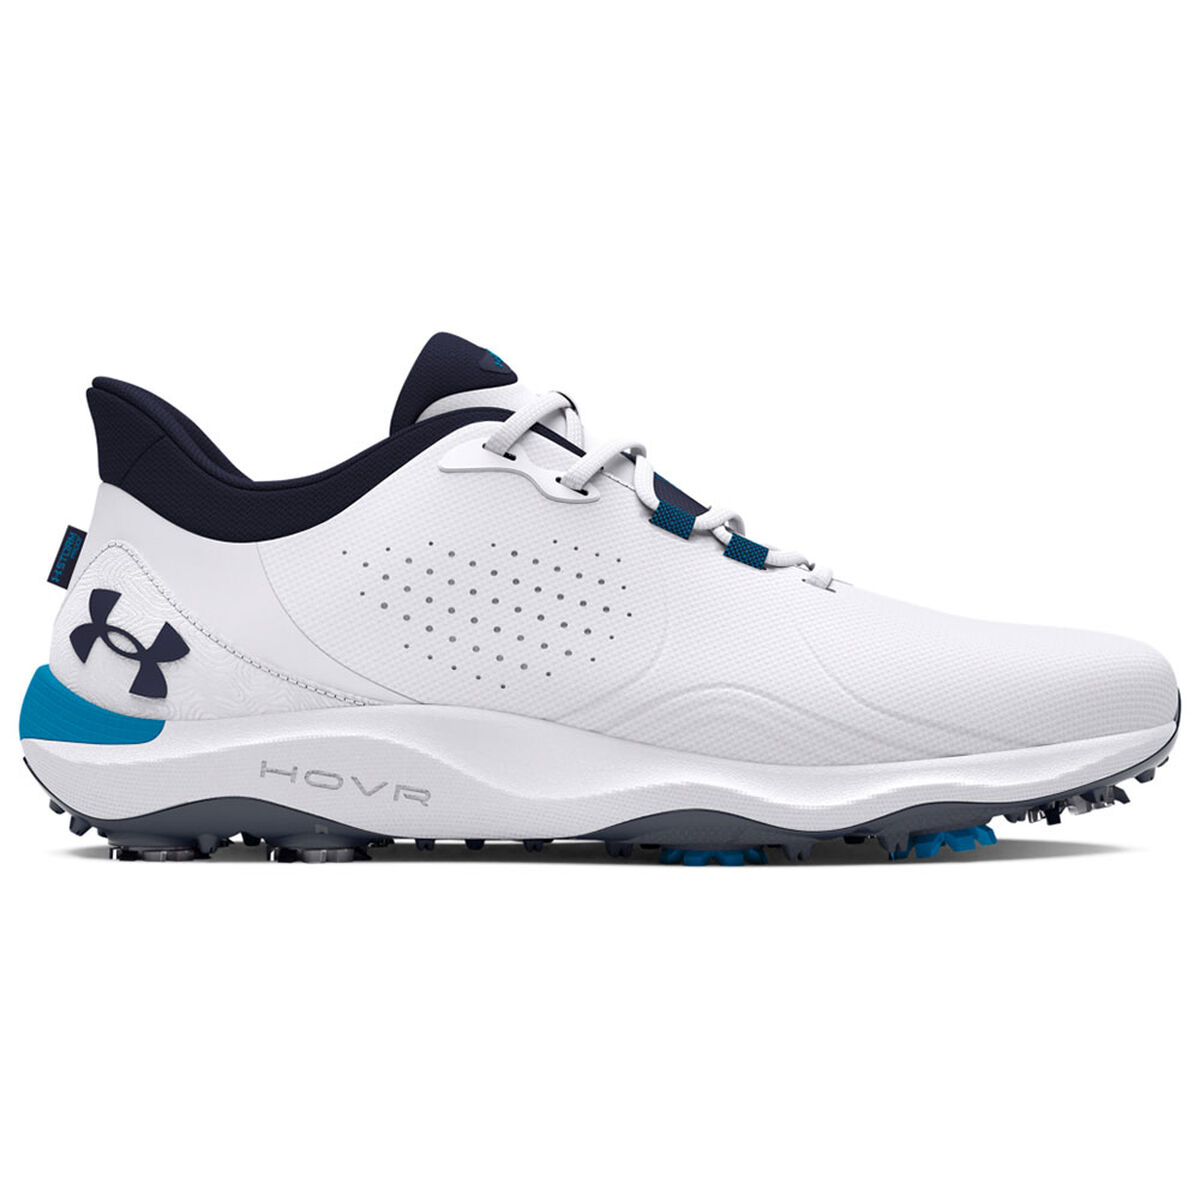 Under Armour Men’s Drive Pro Waterproof Spiked Golf Shoes, Mens, White/capri/midnight navy, 13 | American Golf